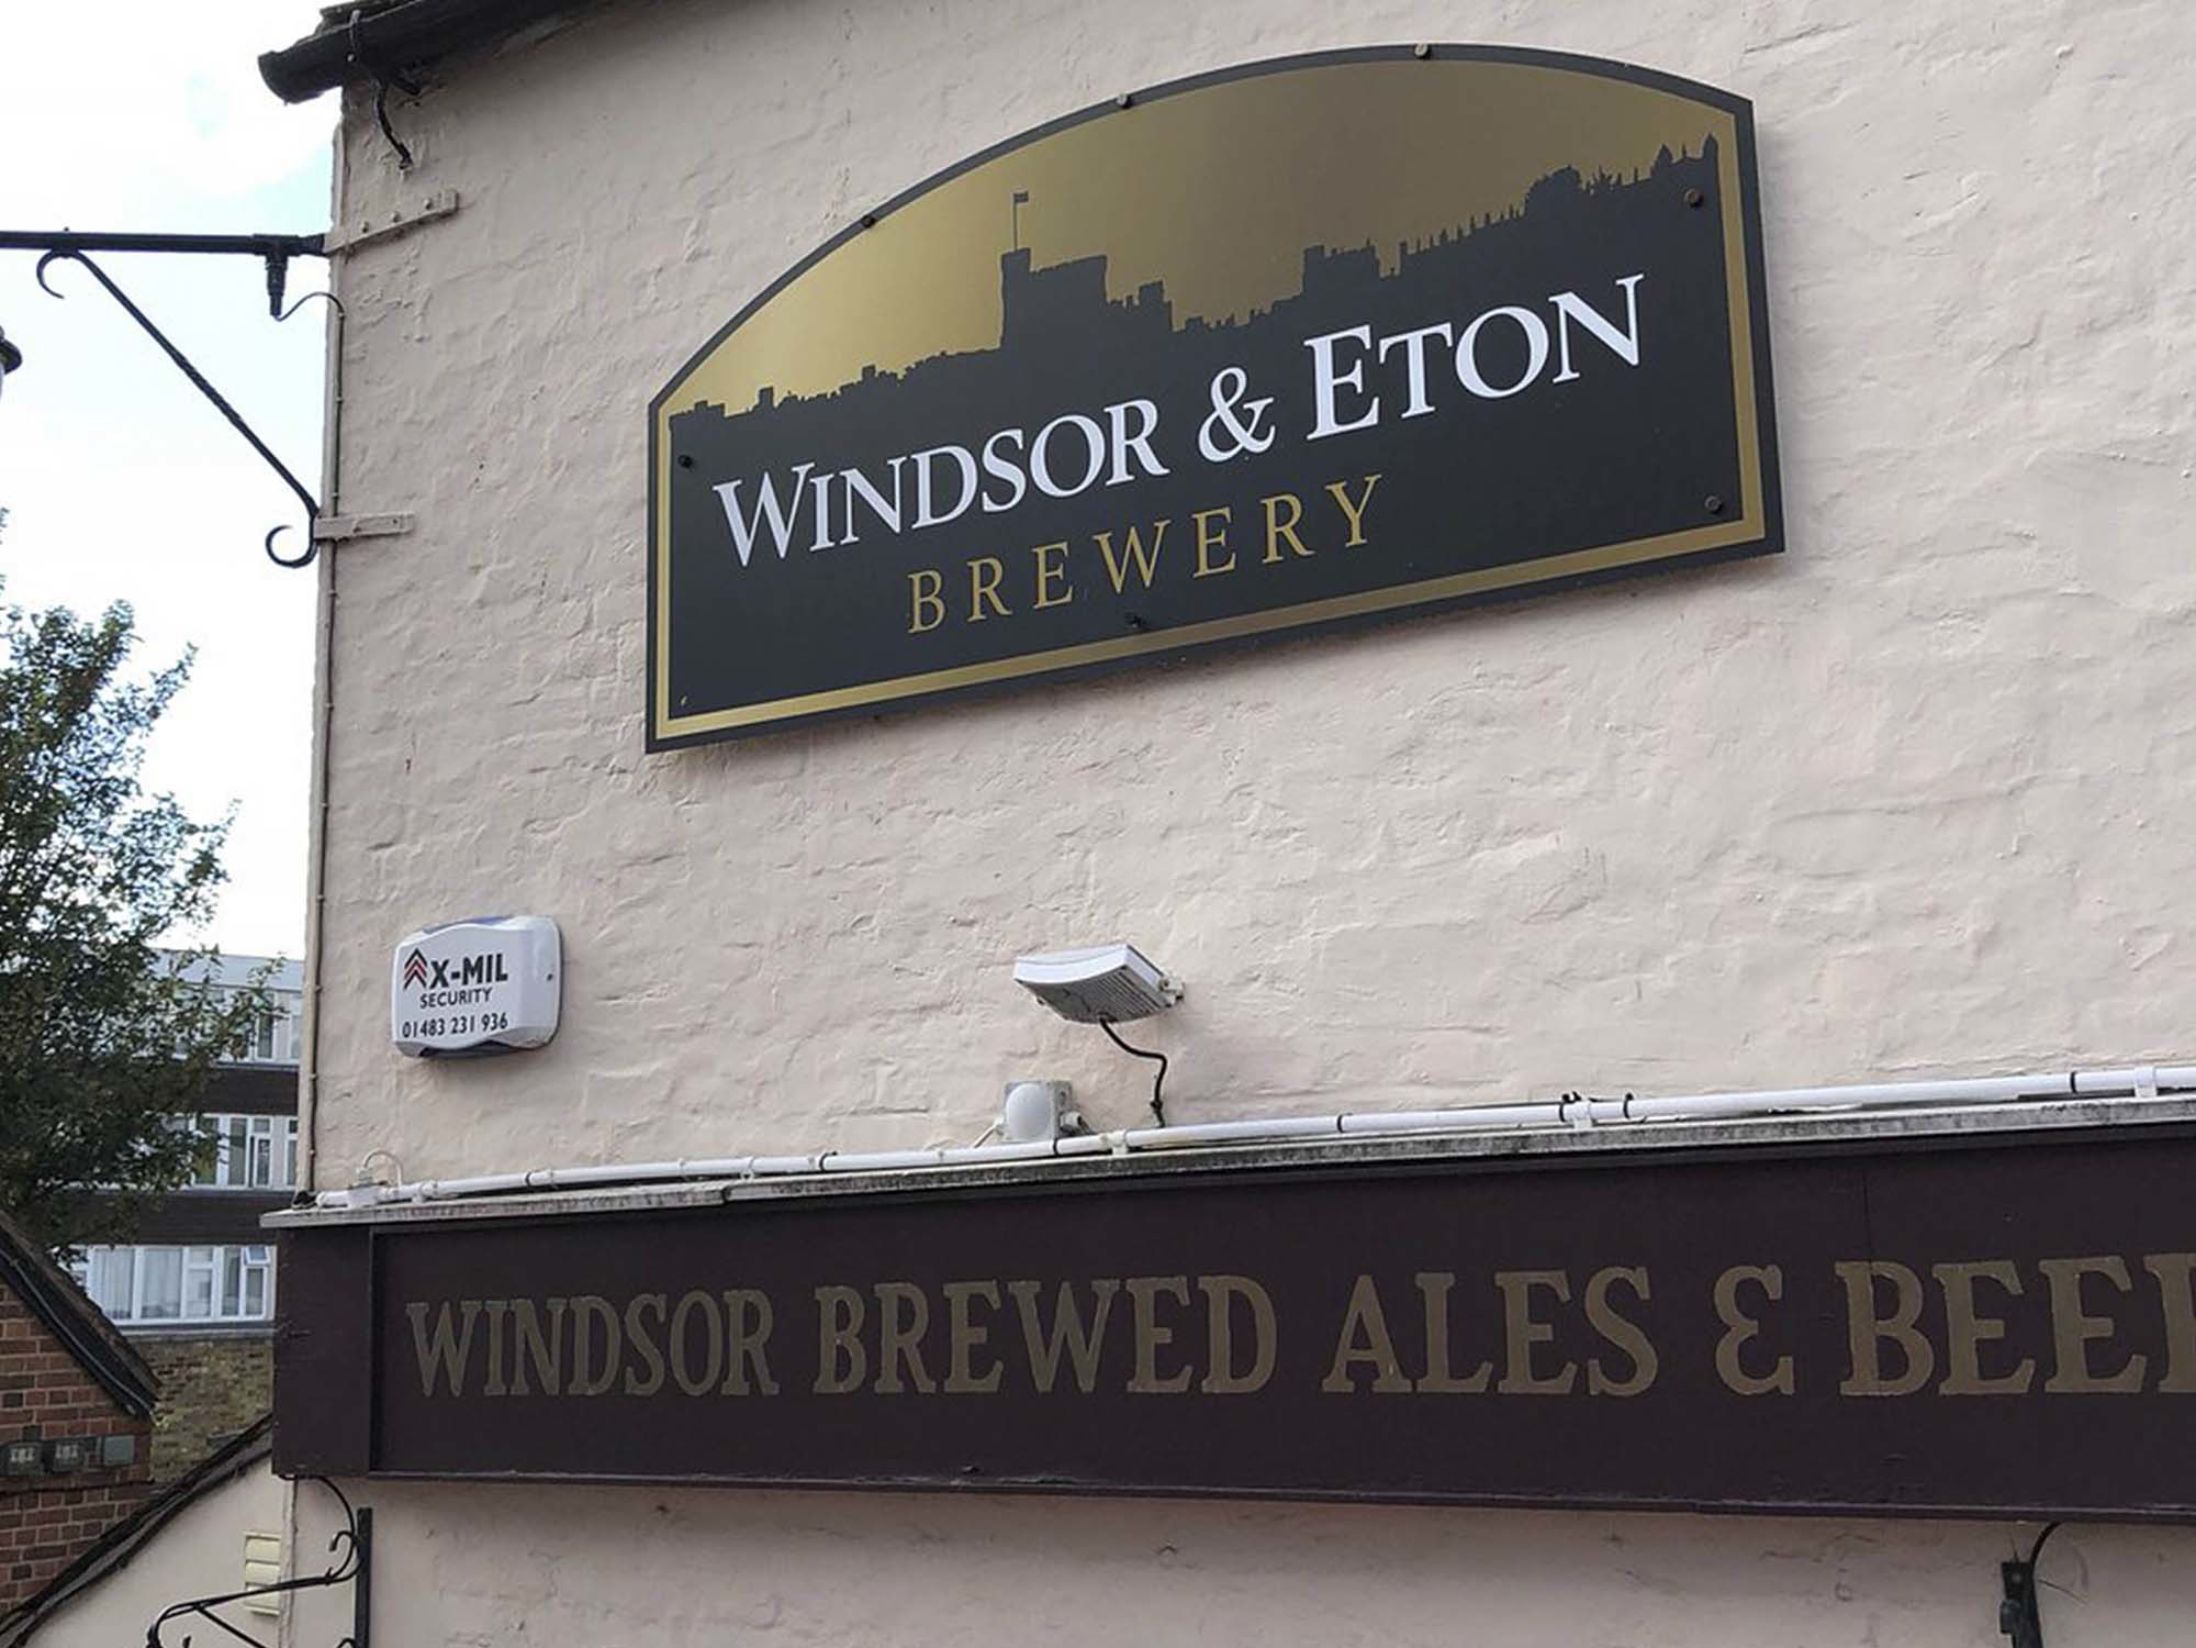 Things to do in Windsor - Windsor & Eton Brewery